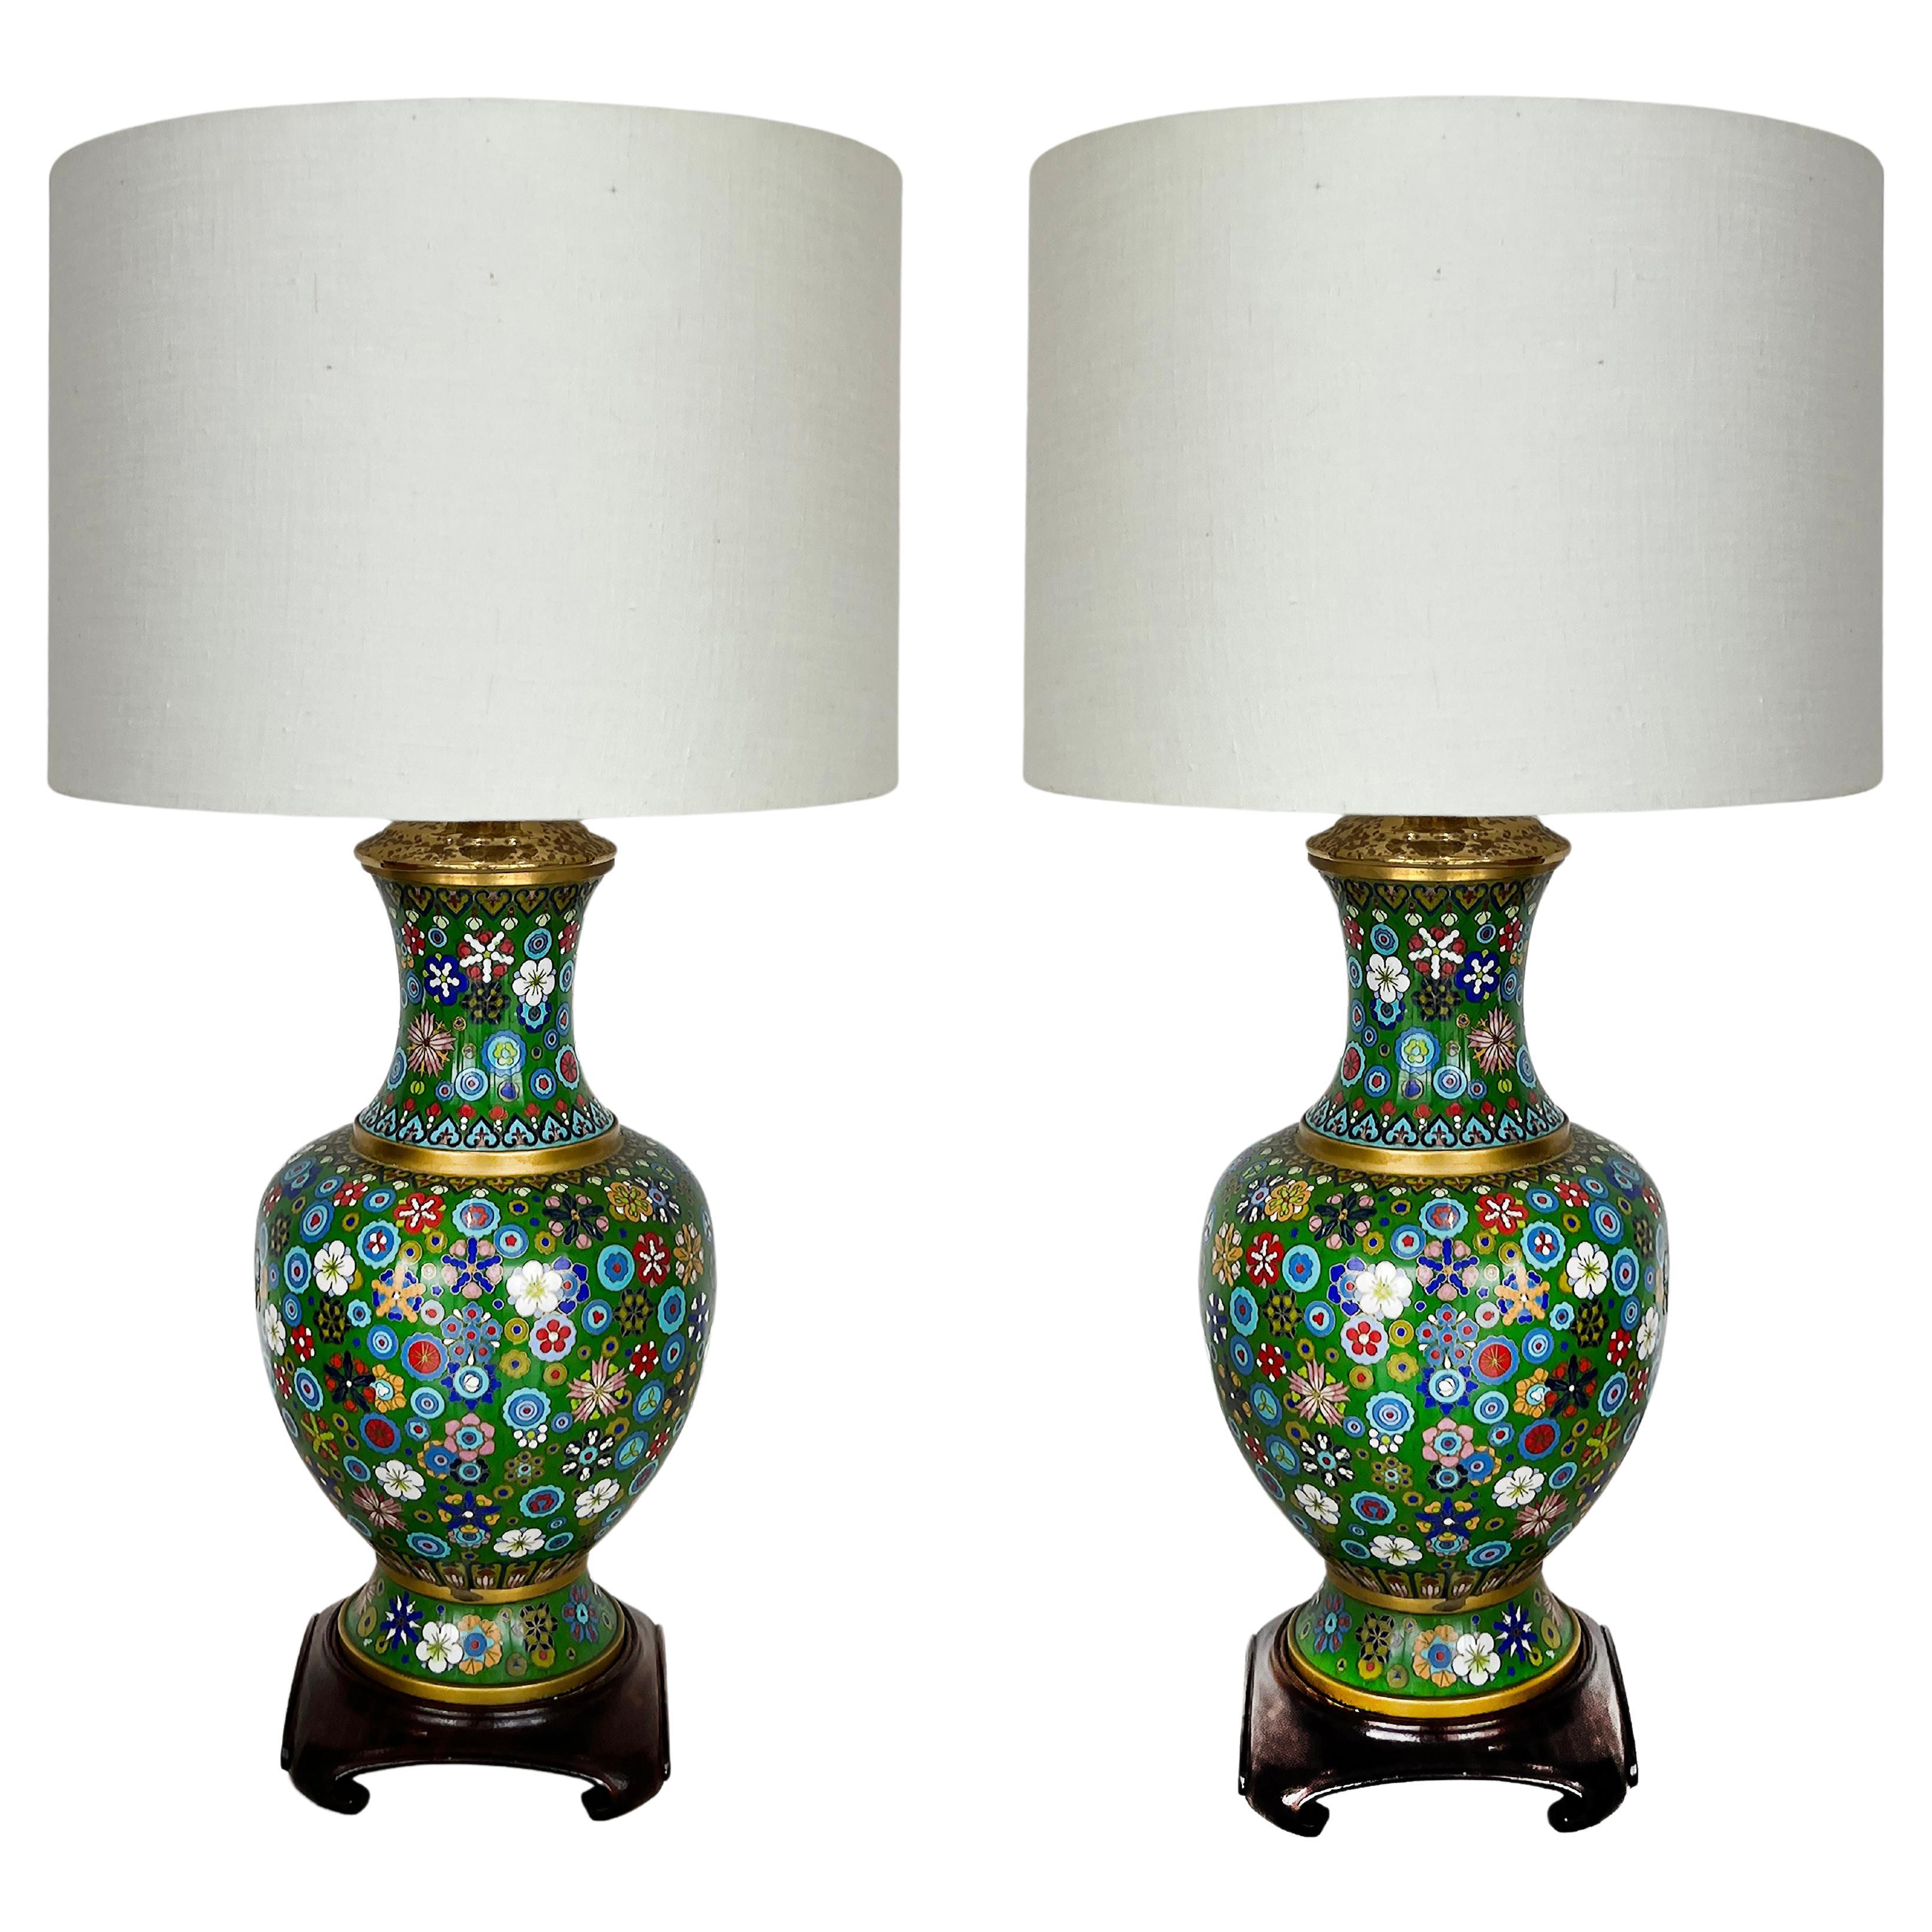 Pair of Mid-century Chinese Cloisonne Urns Table Lamps on Wood Bases